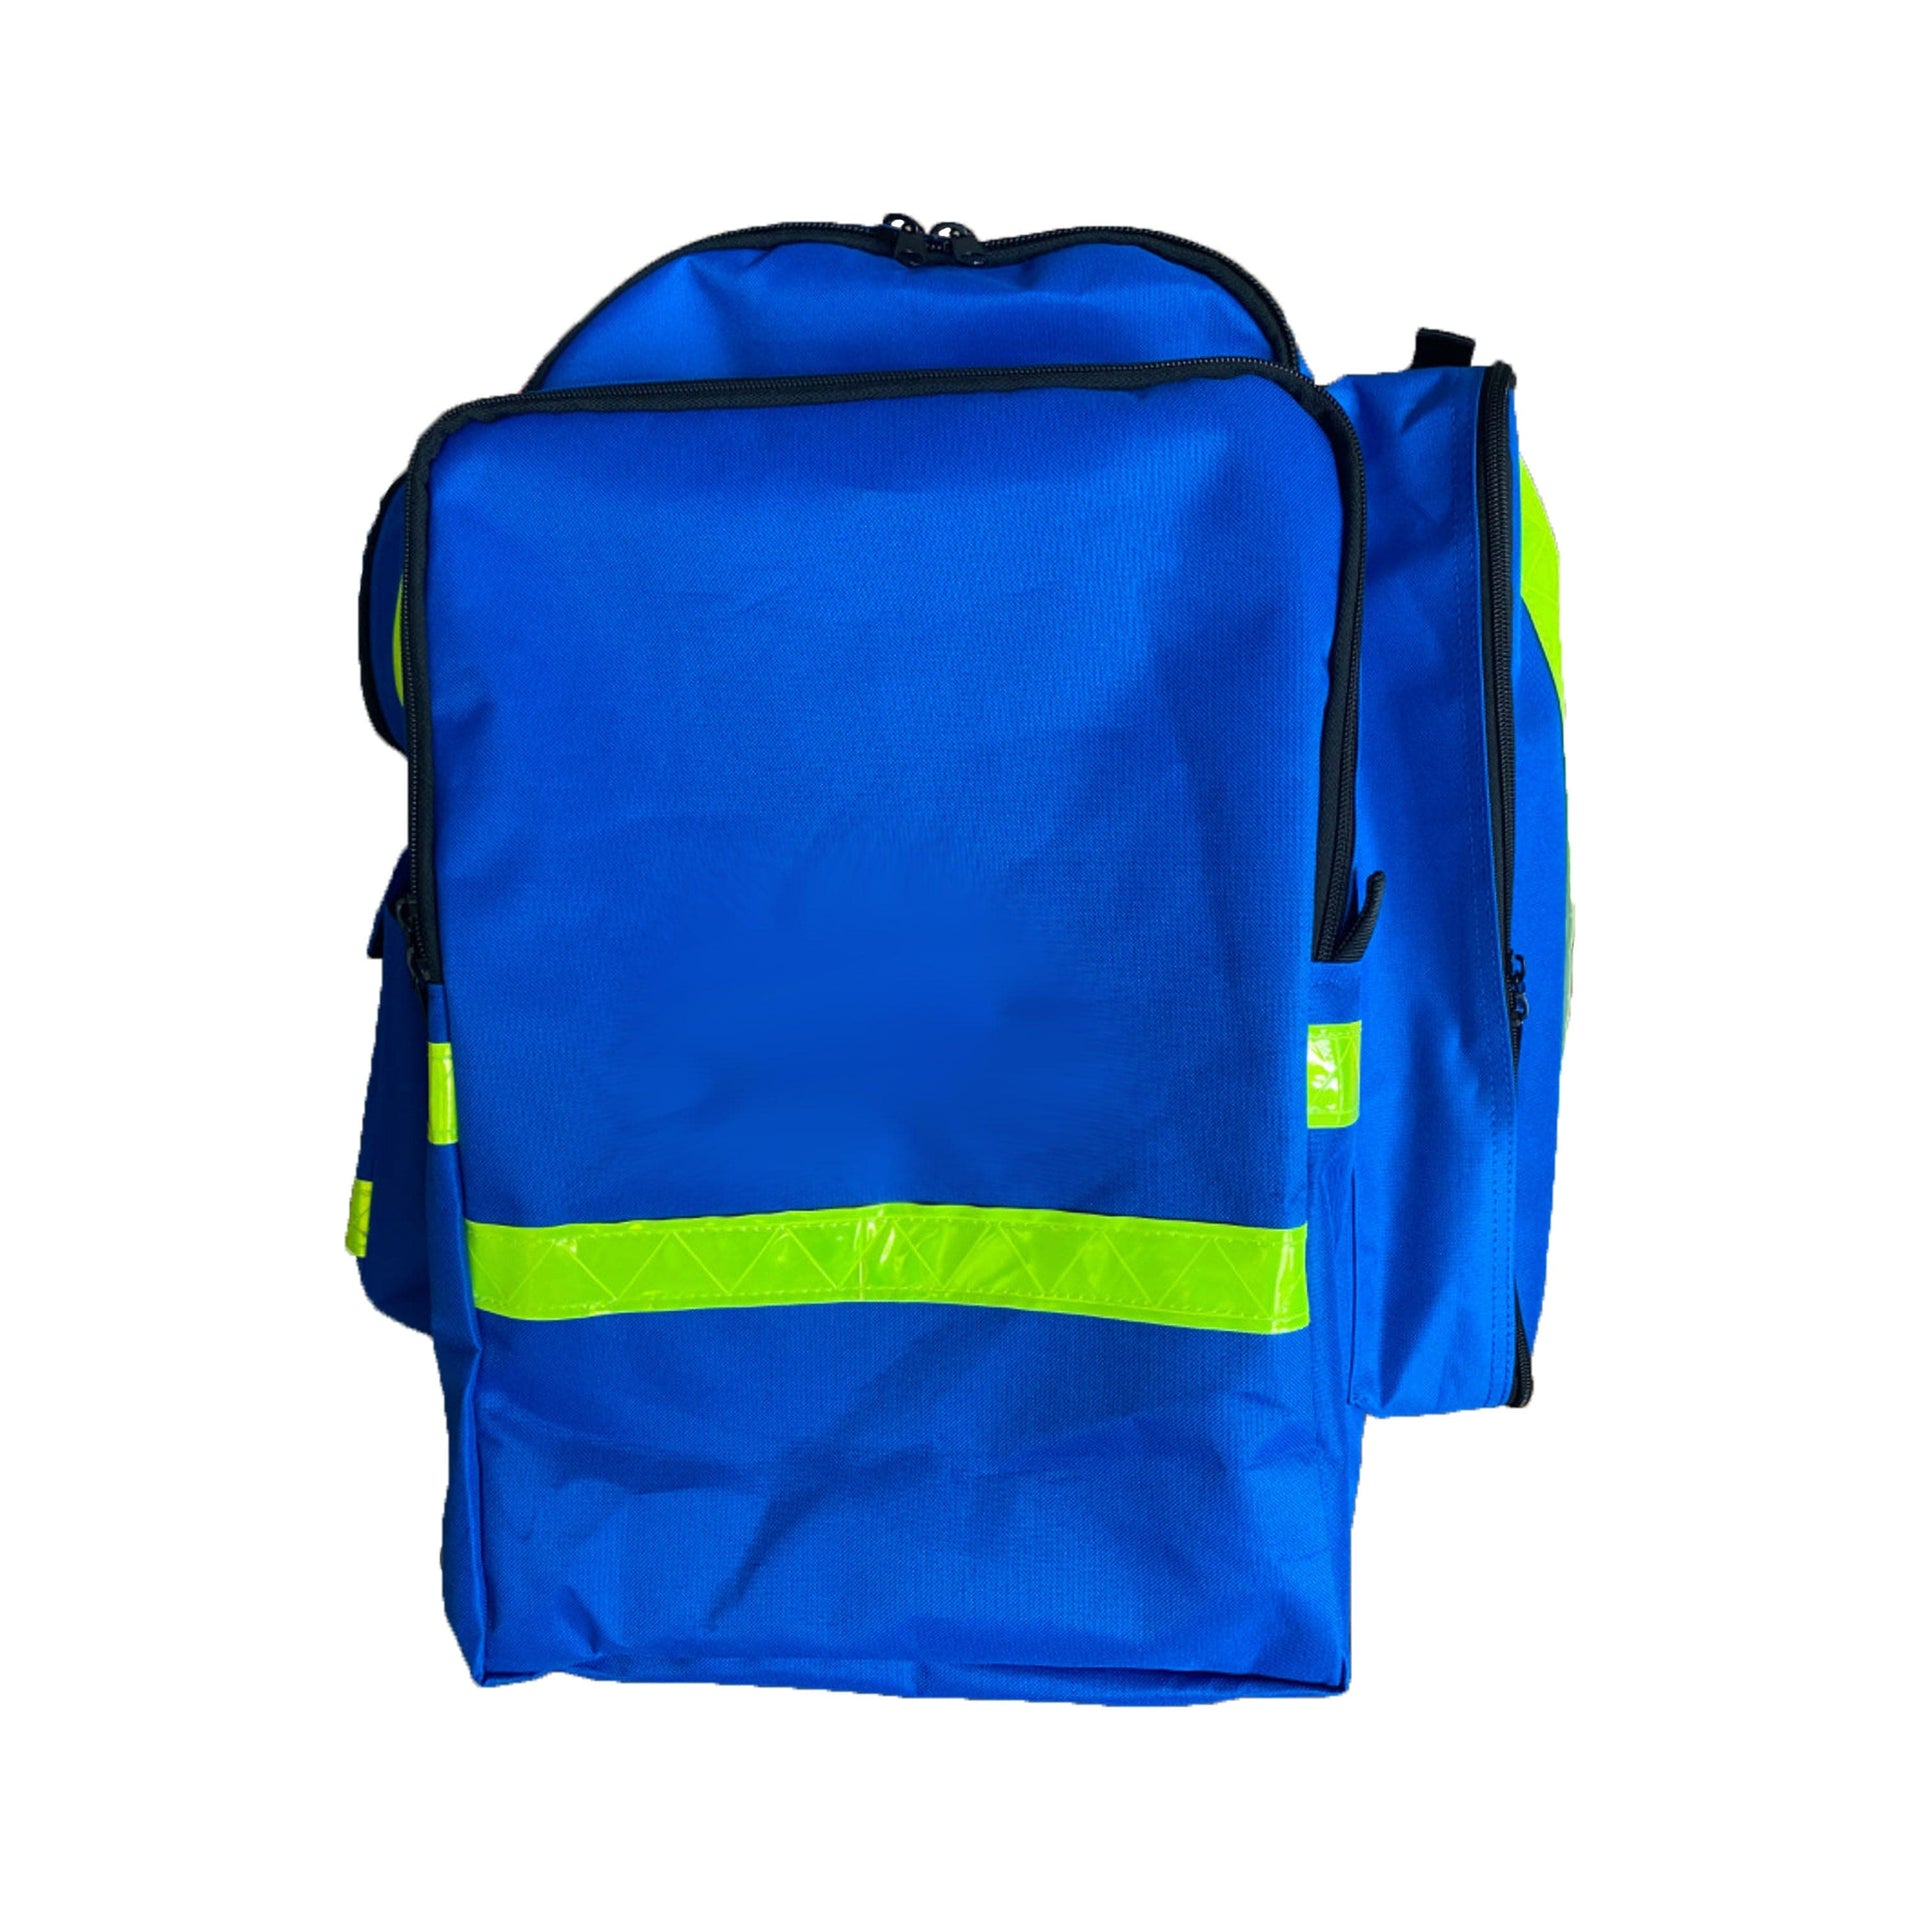 Paramedic Shop Add-Tech Pty Ltd Pouch Royal Blue Deluxe Resuscitation Backpack - BAG ONLY